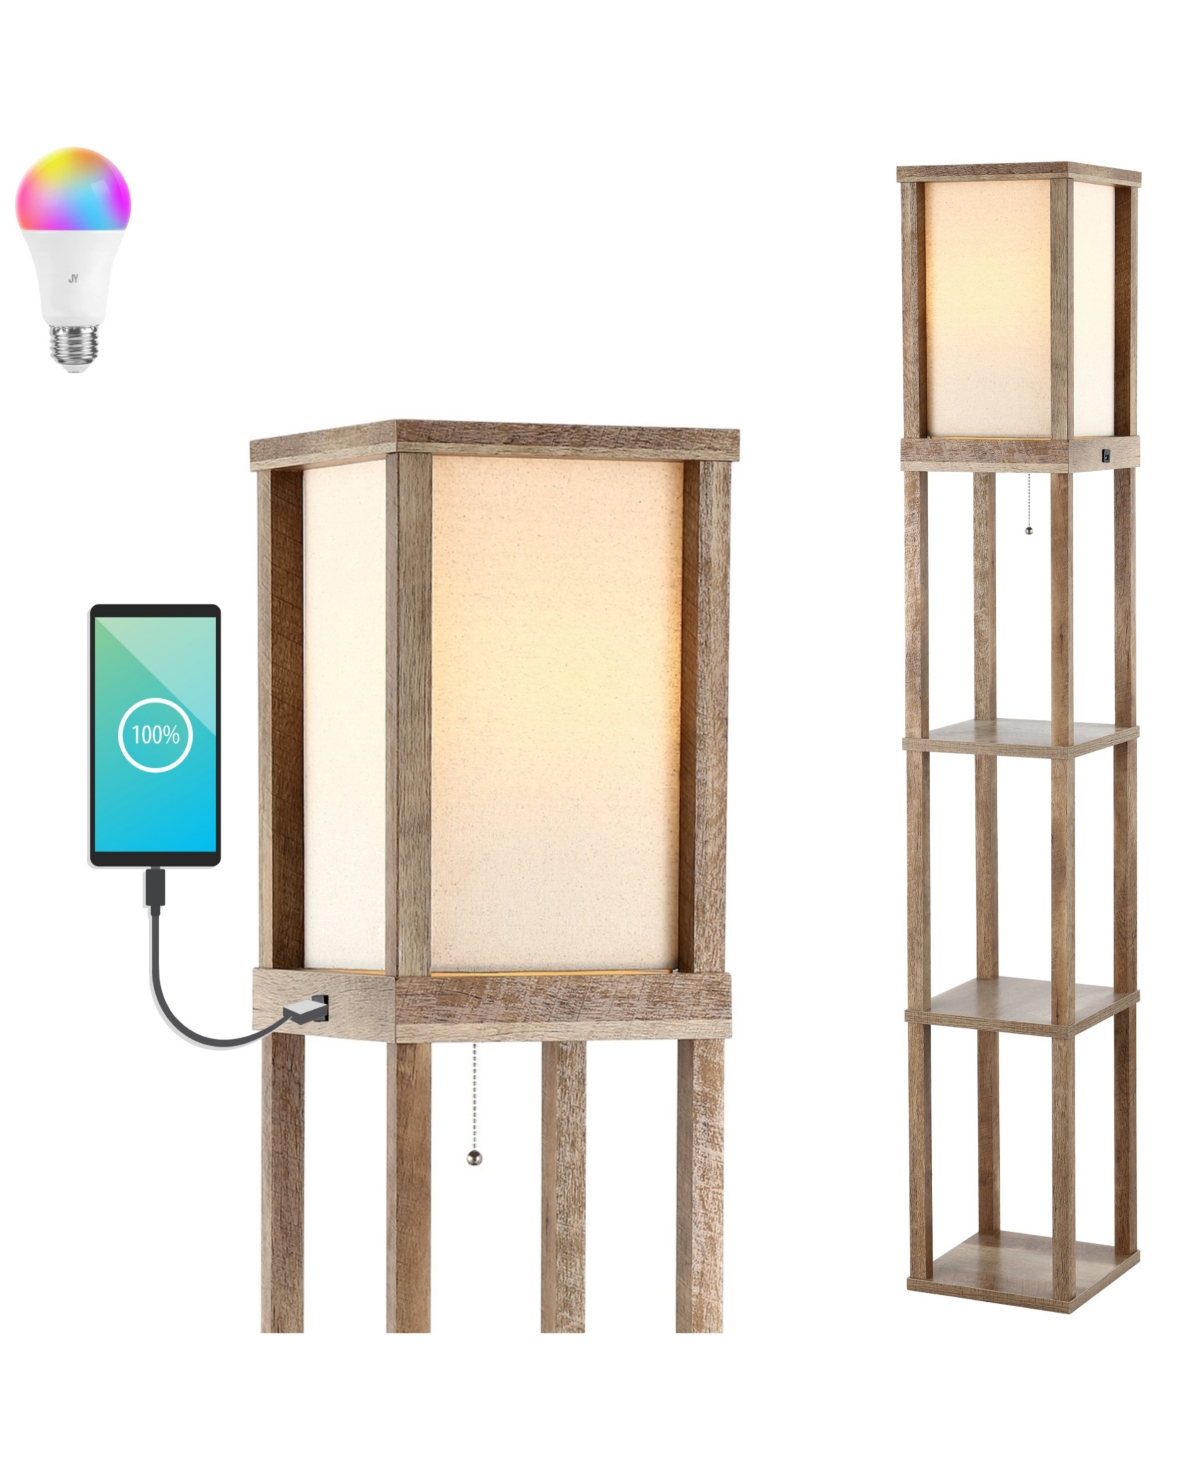 Jonathan Y Etagere 63.5" Rustic Bohemian Wooden Led 3-shelf Floor Lamp With Pull-chain, Usb Charging Port And S In Brown